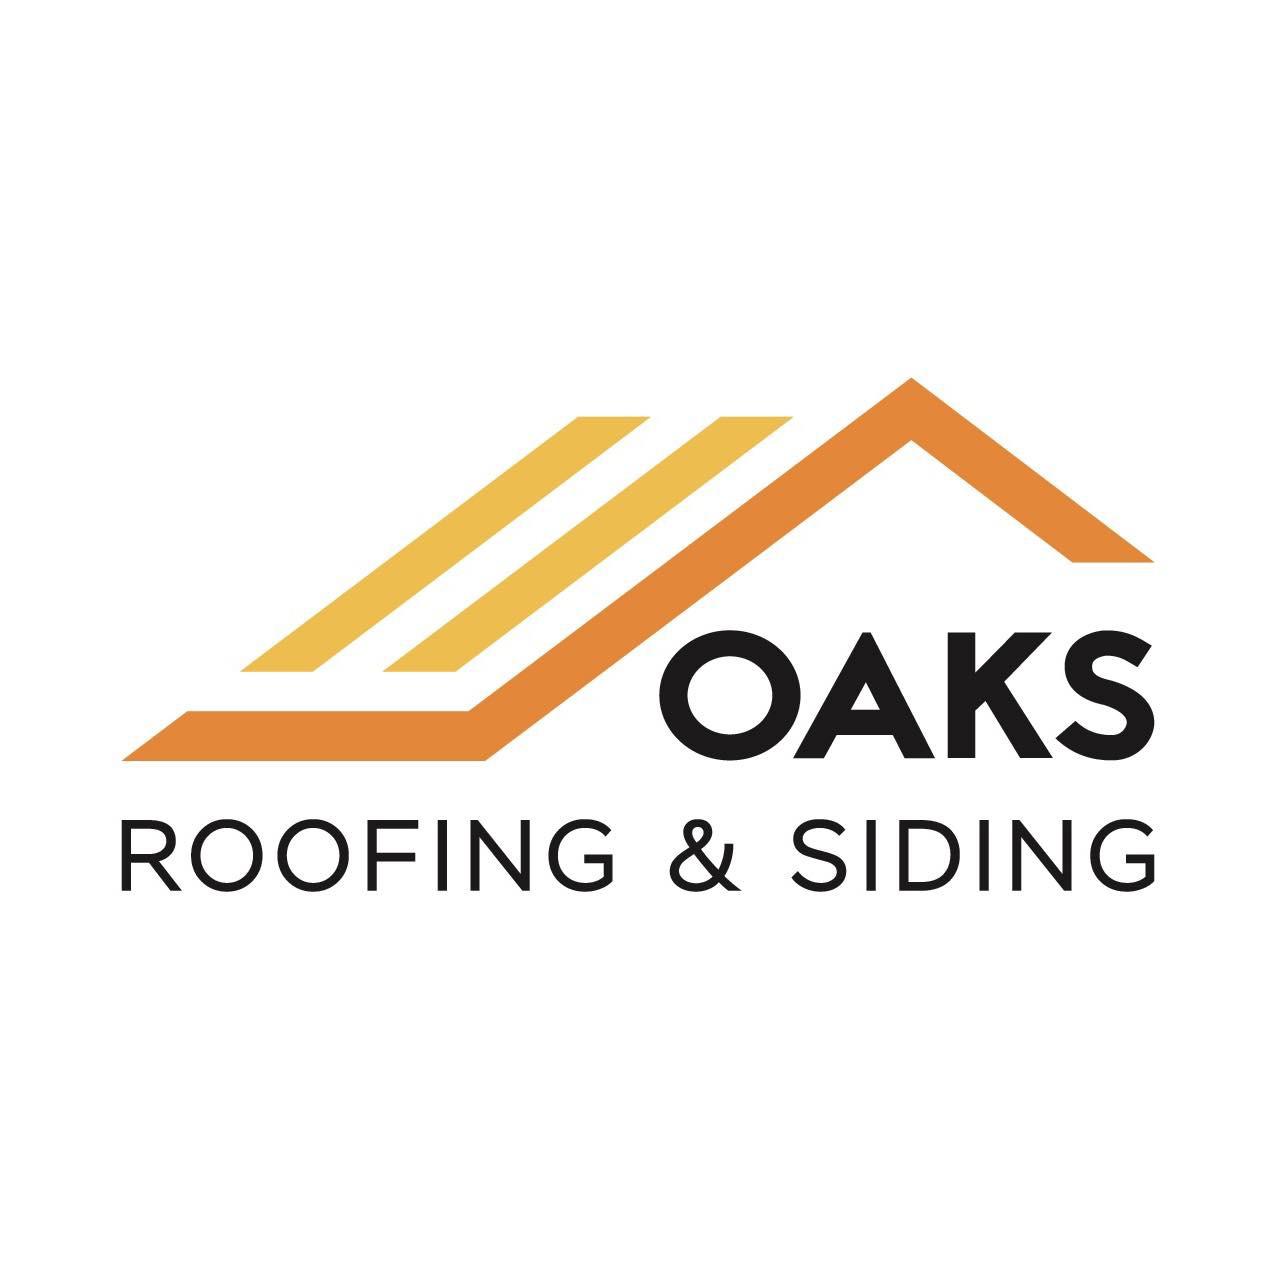 Oaks Roofing and Siding - Cleveland, OH 44114 - (216)584-6257 | ShowMeLocal.com